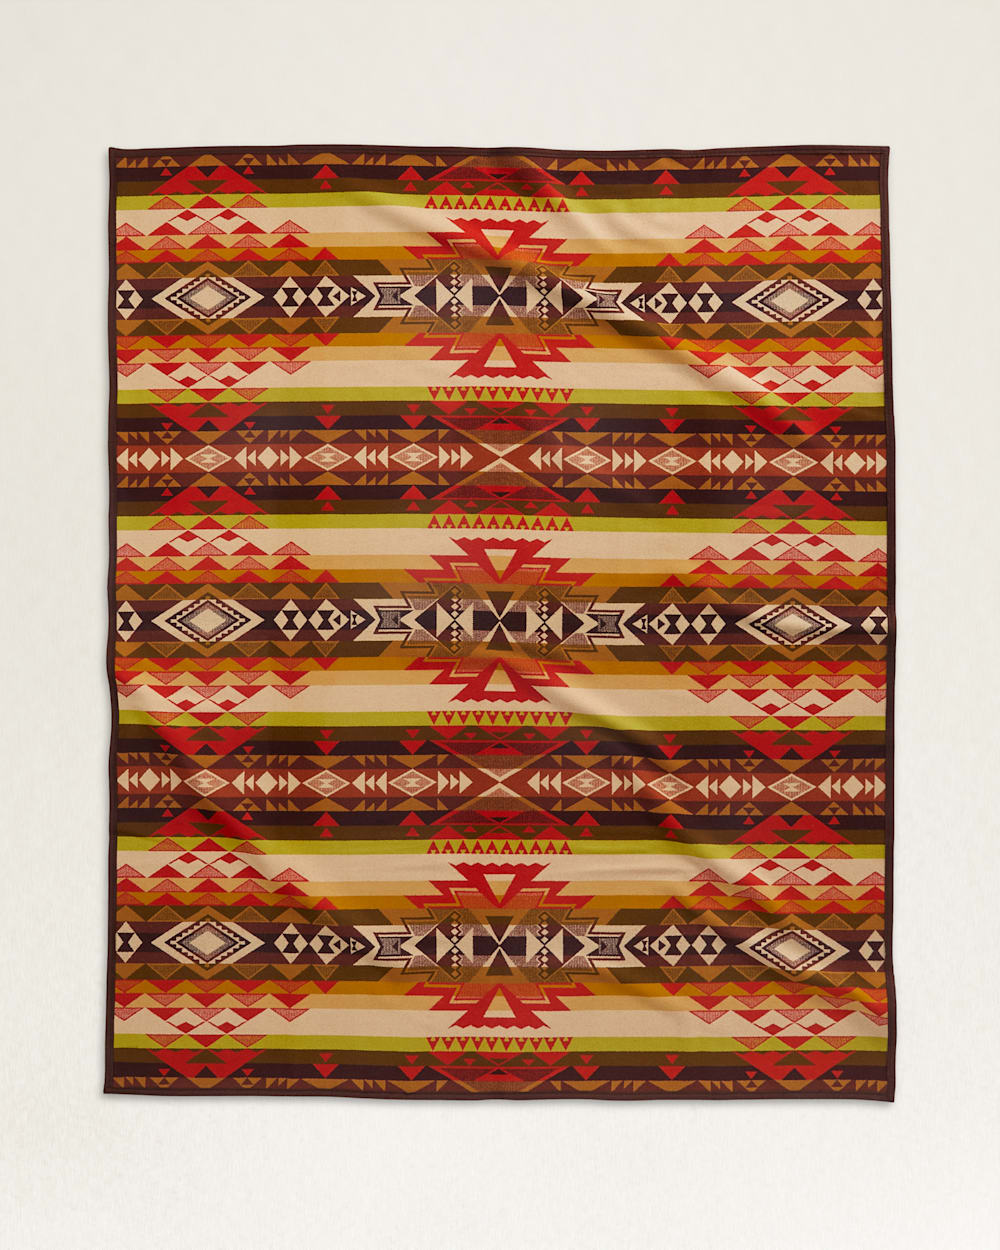 ALTERNATE VIEW OF LIMITED EDITION HIGHLAND PEAK BLANKET IN RED CHILI image number 2